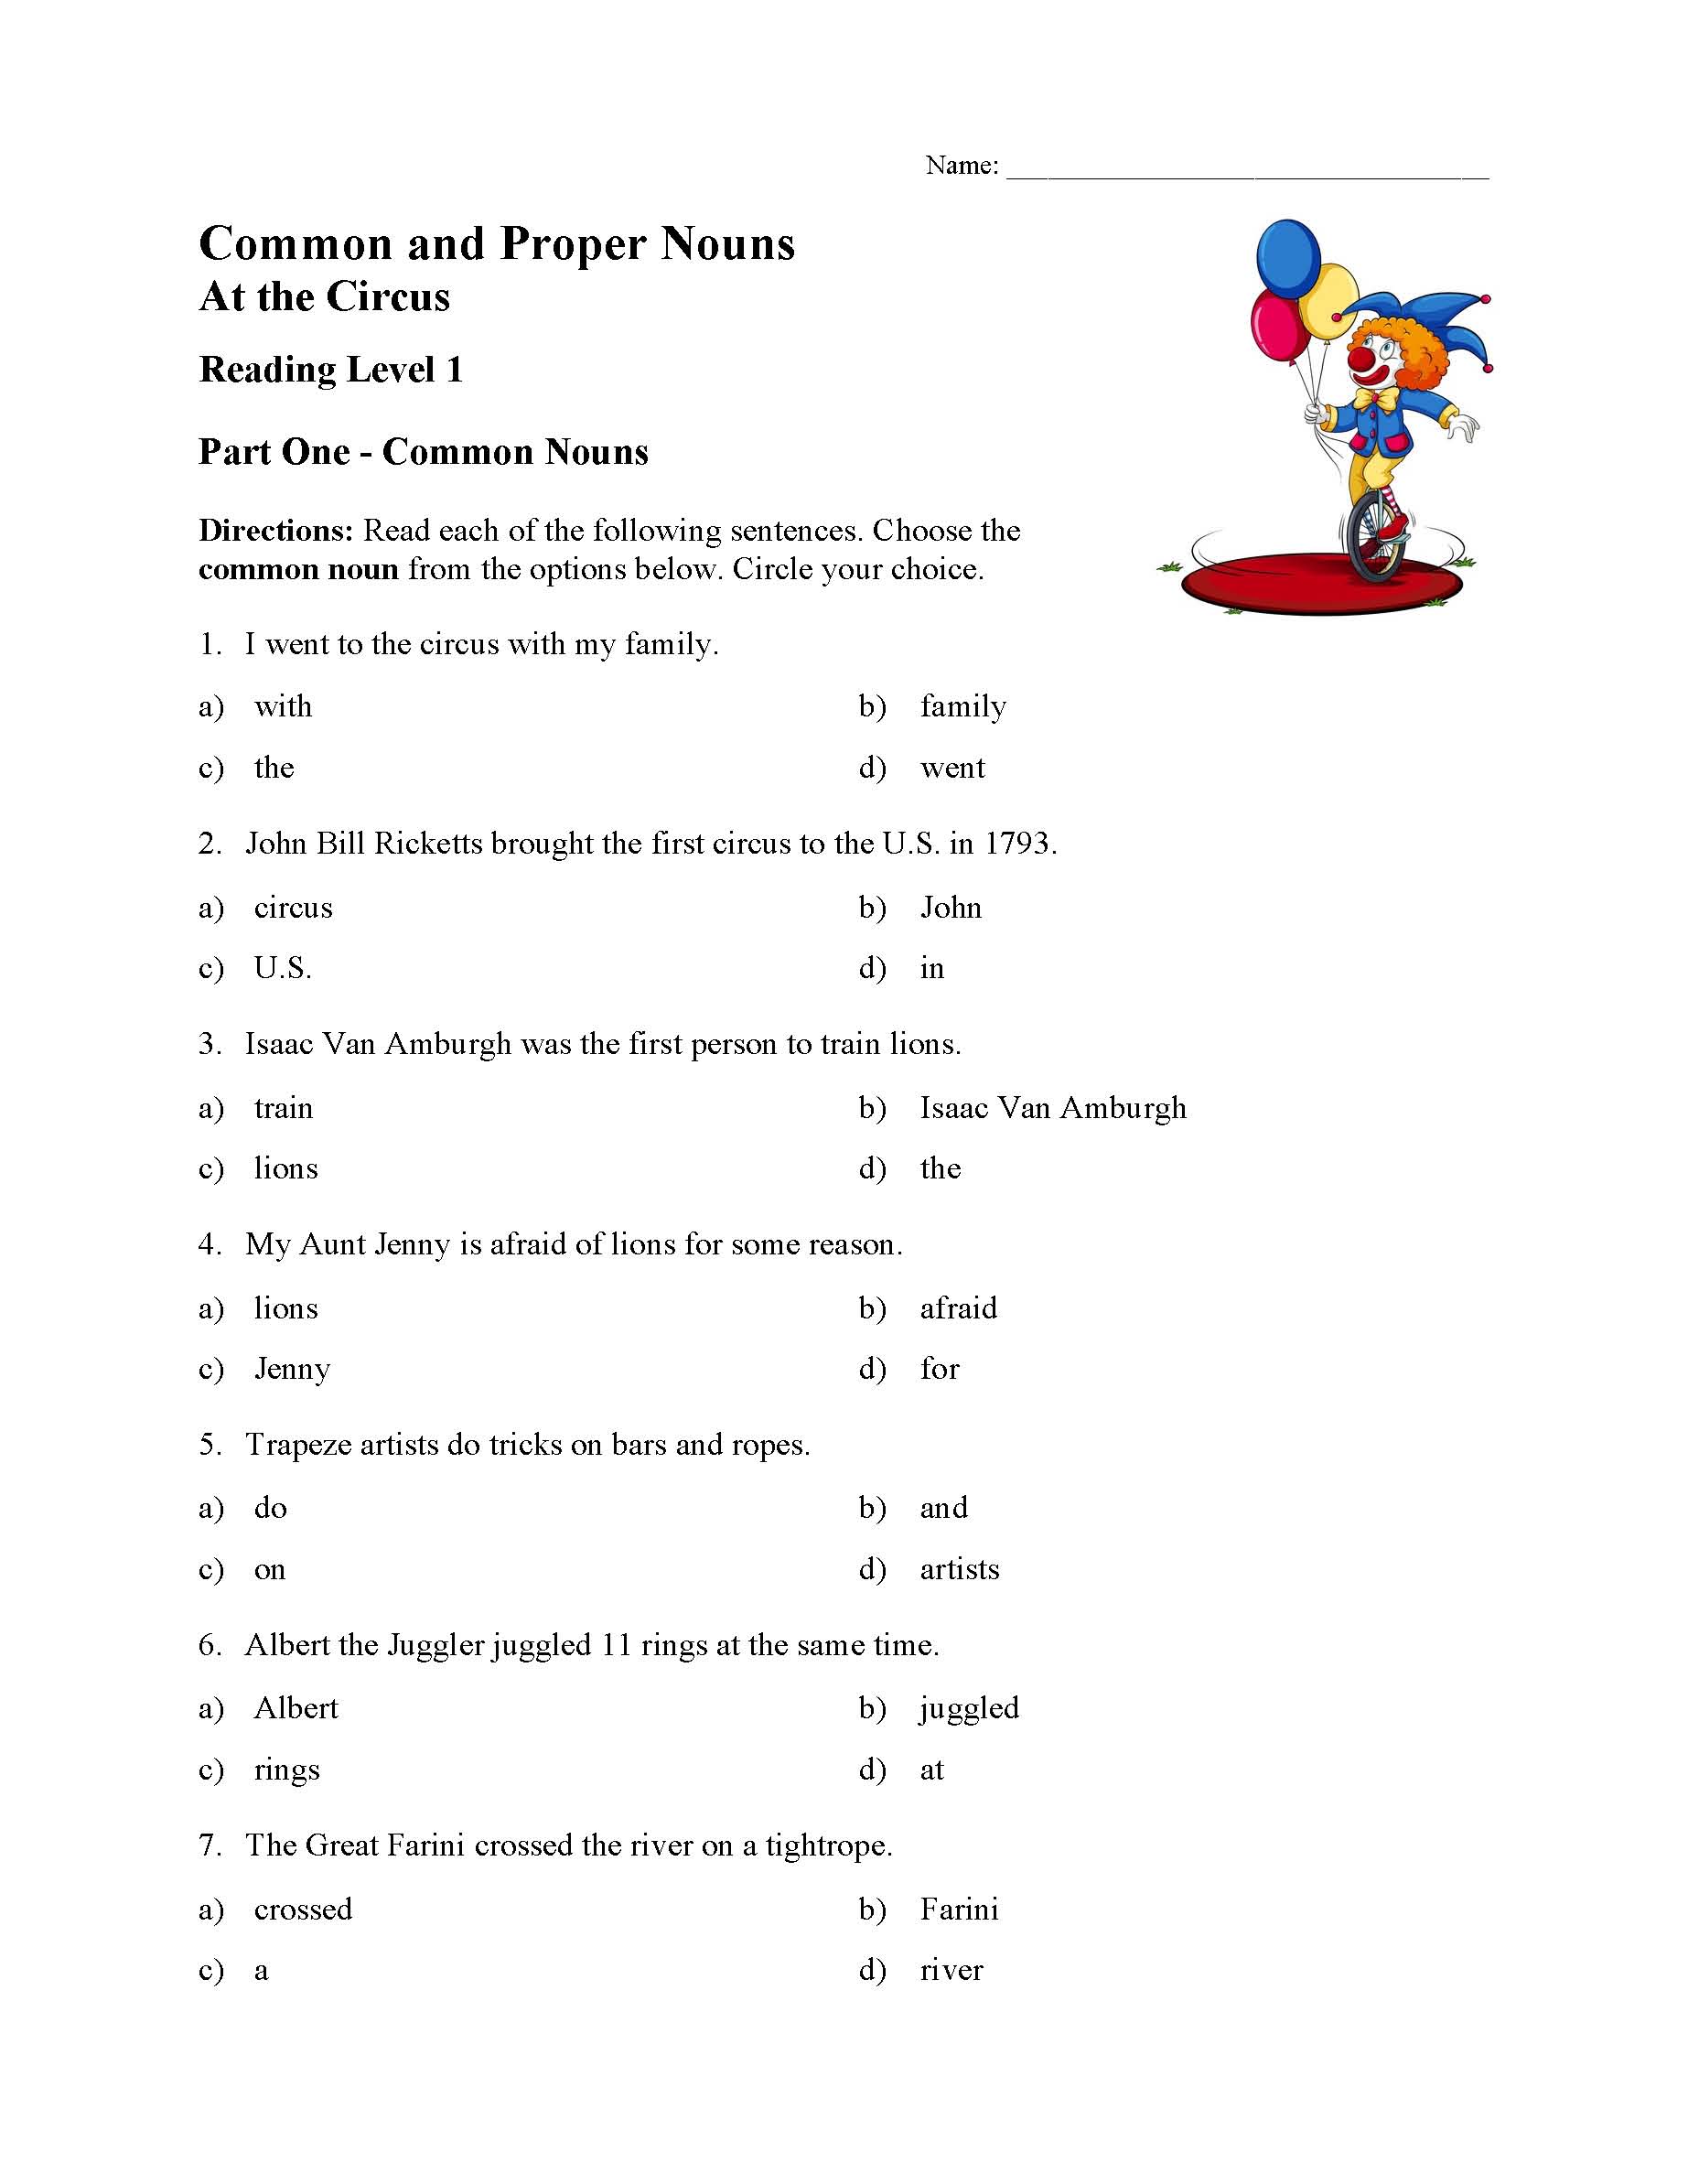 This is a preview image of the Common and Proper Nouns Test 1 | Reading Level 1.